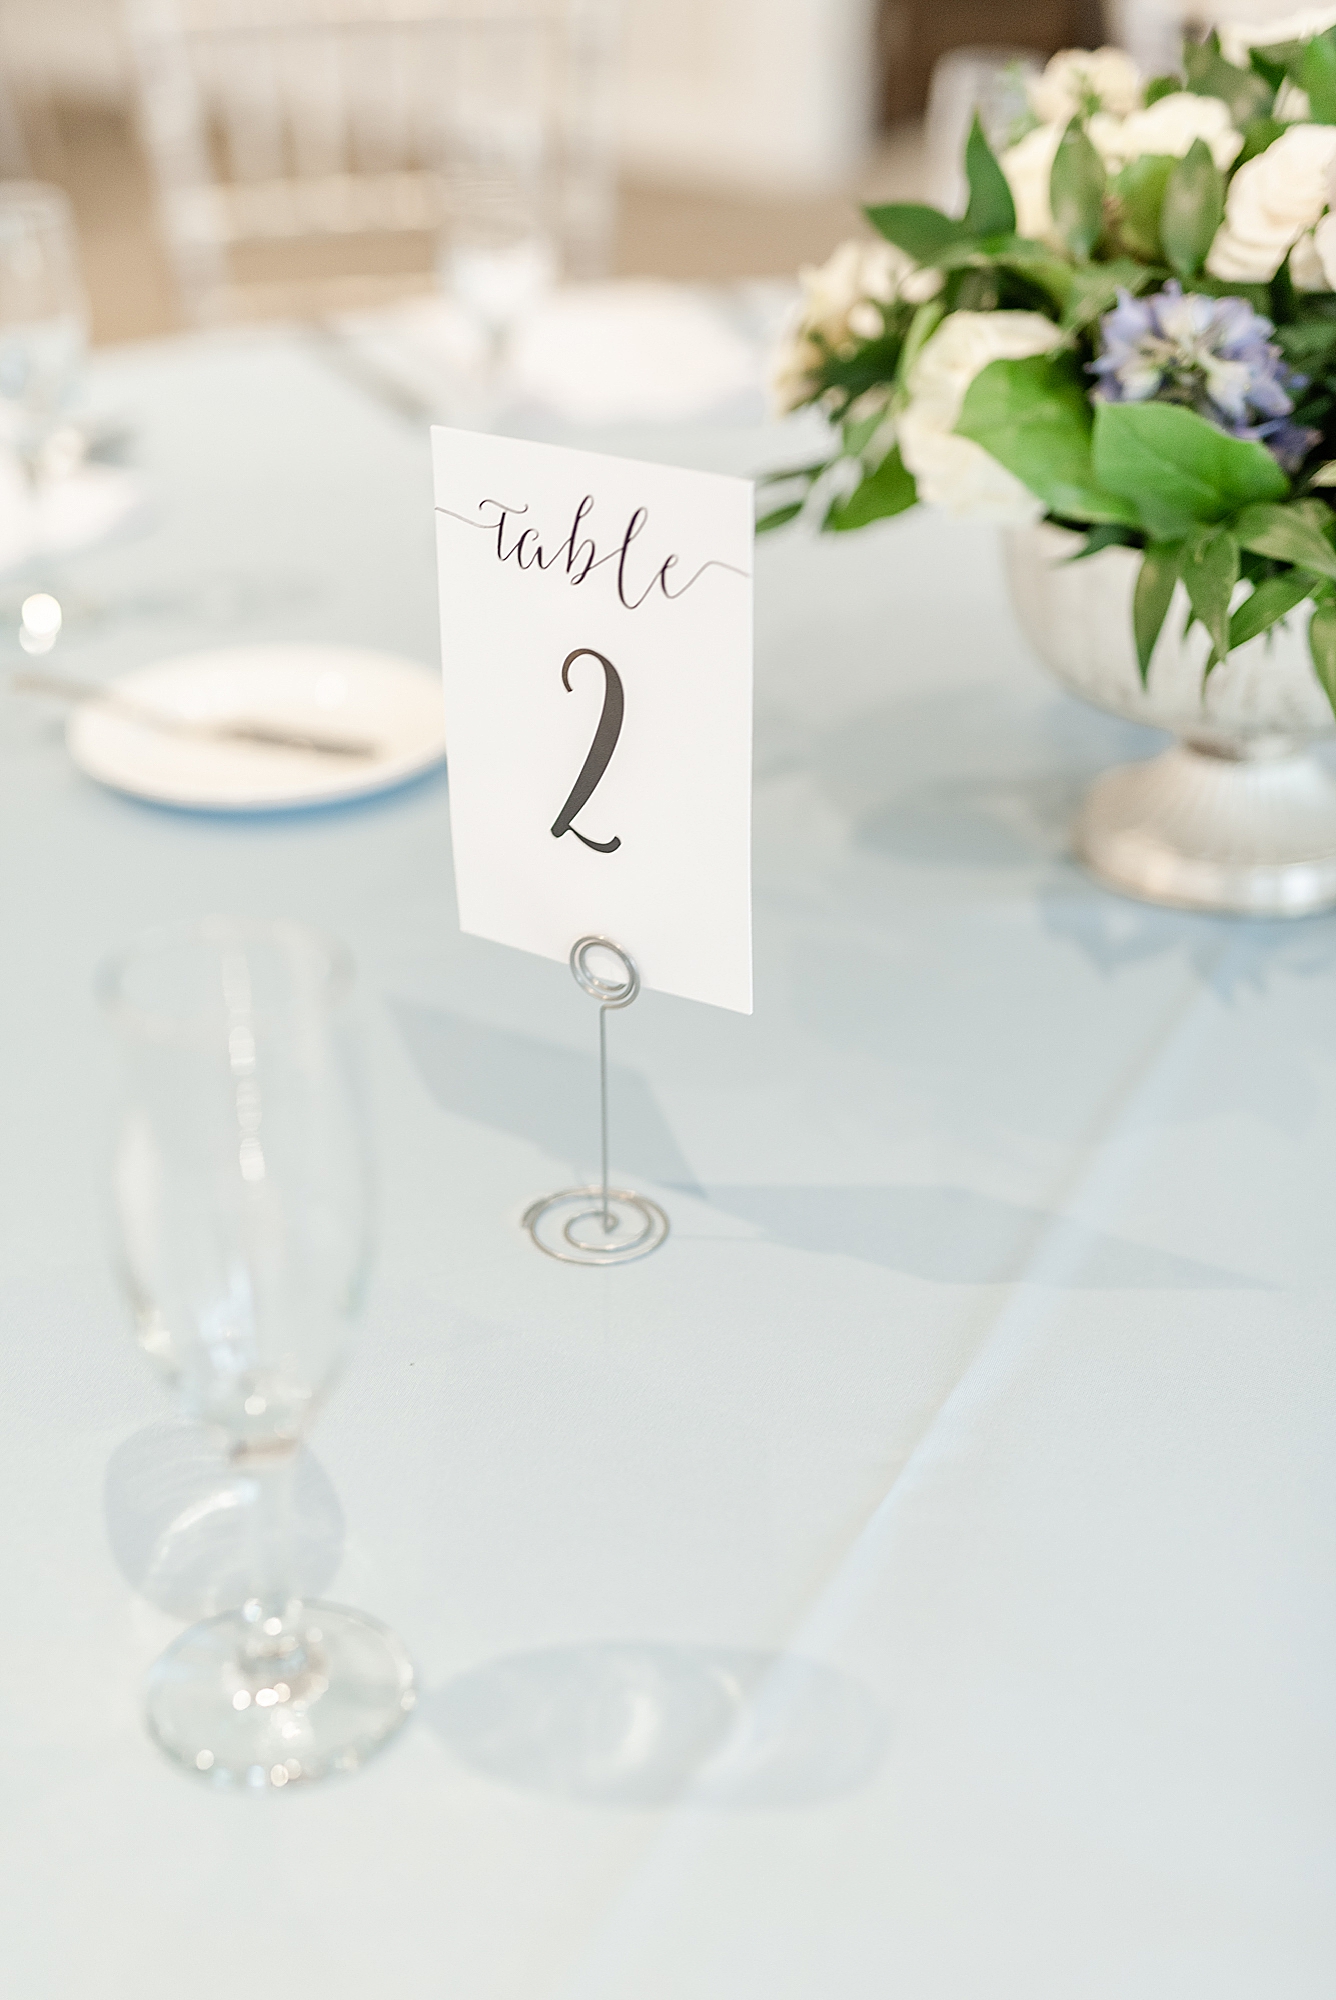 wedding table numbers on light blue table cloth